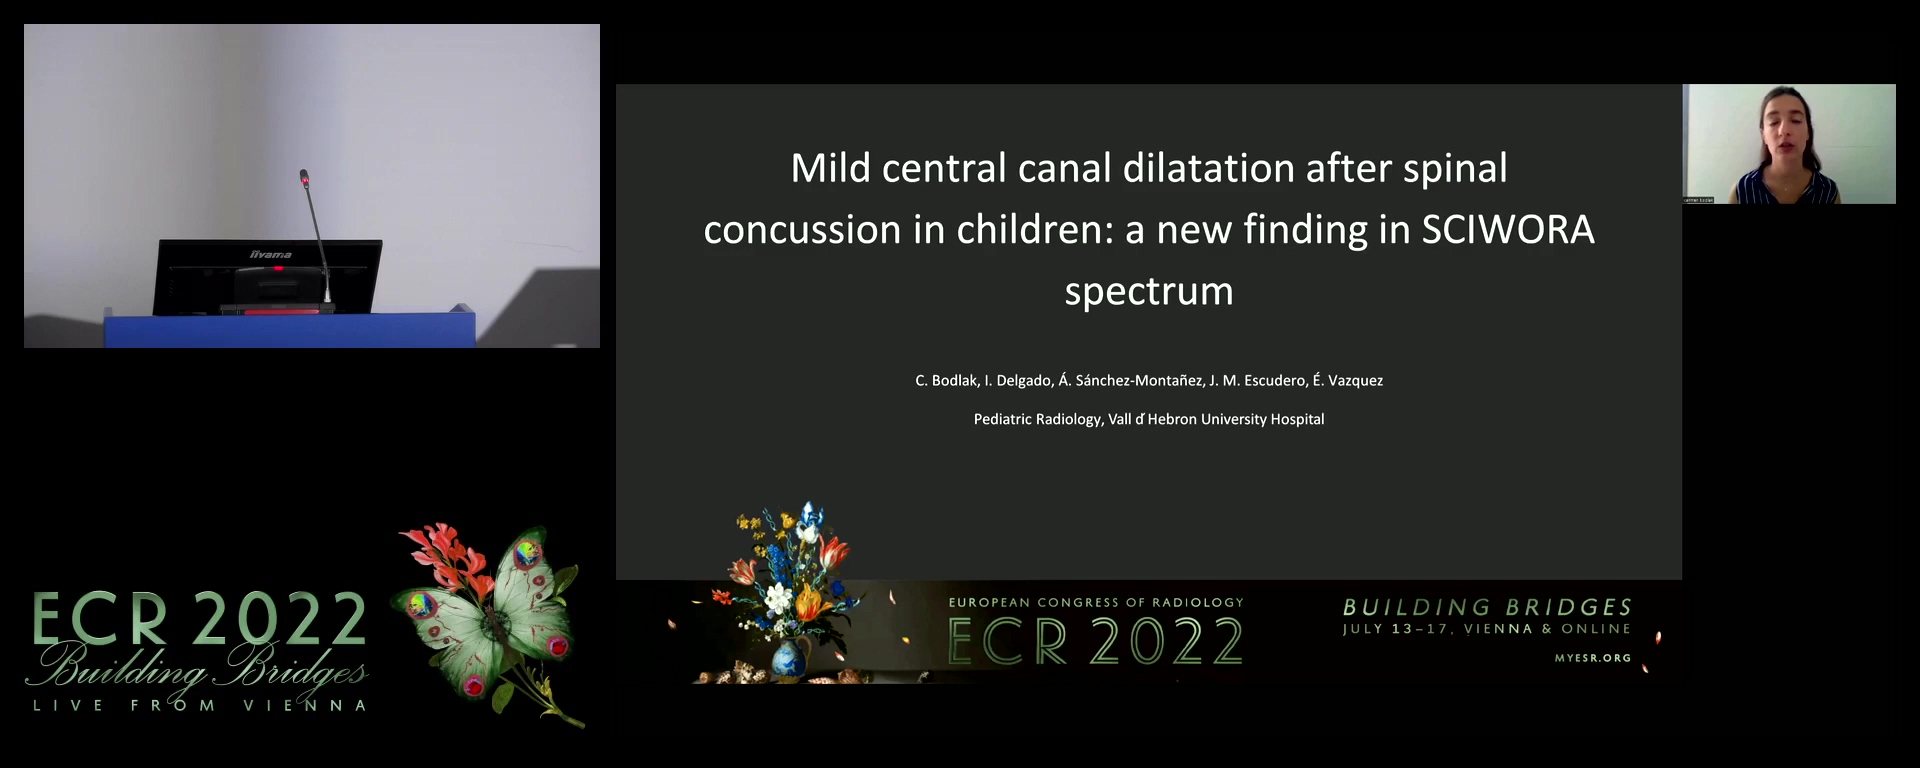 Mild central canal dilatation after spinal concussion in children: a new finding in SCIWORA spectrum - Carmen Bodlak, valencia / ES